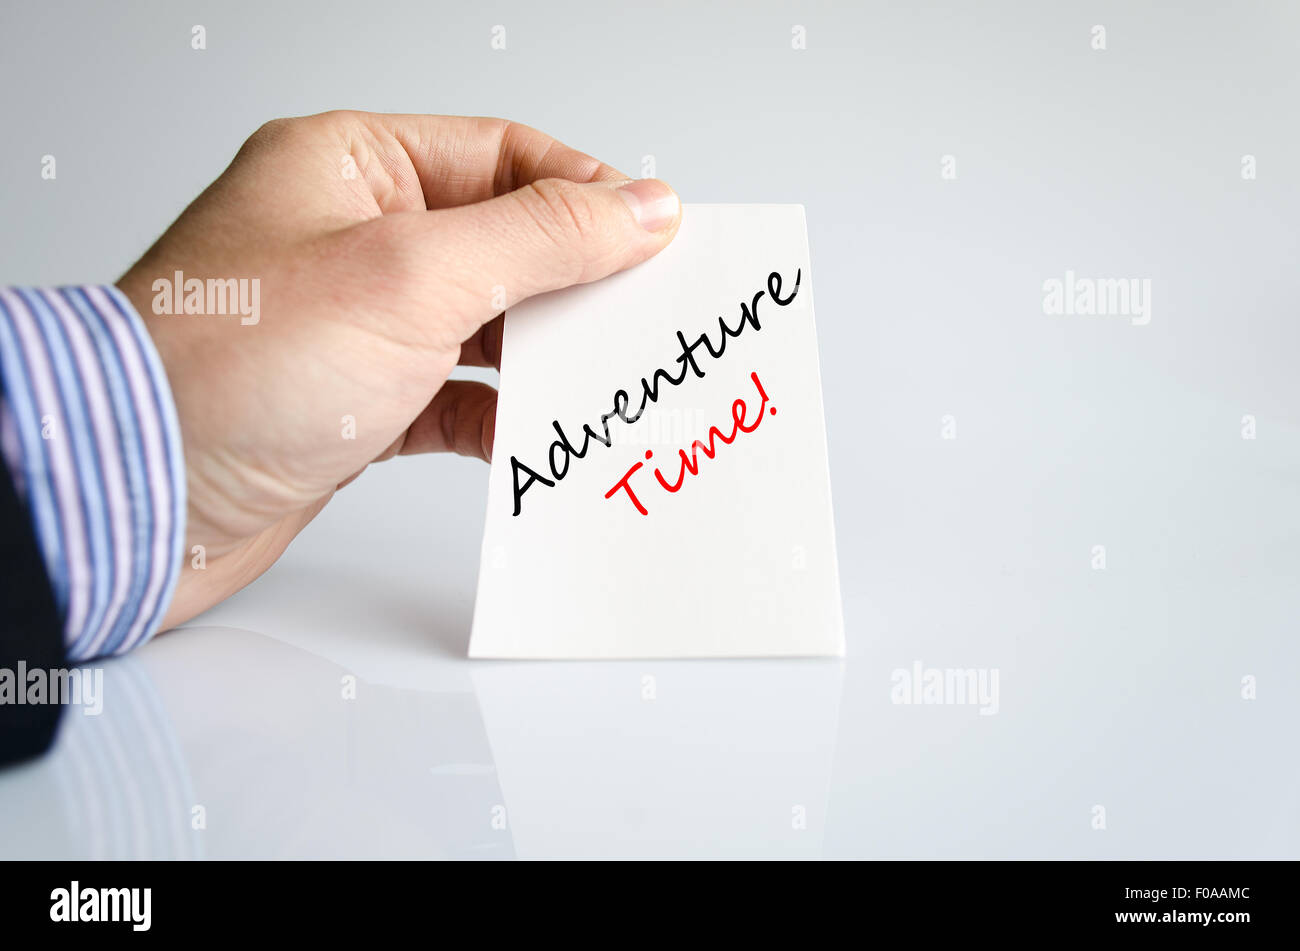 Adventure time text concept isolated over white background Stock Photo